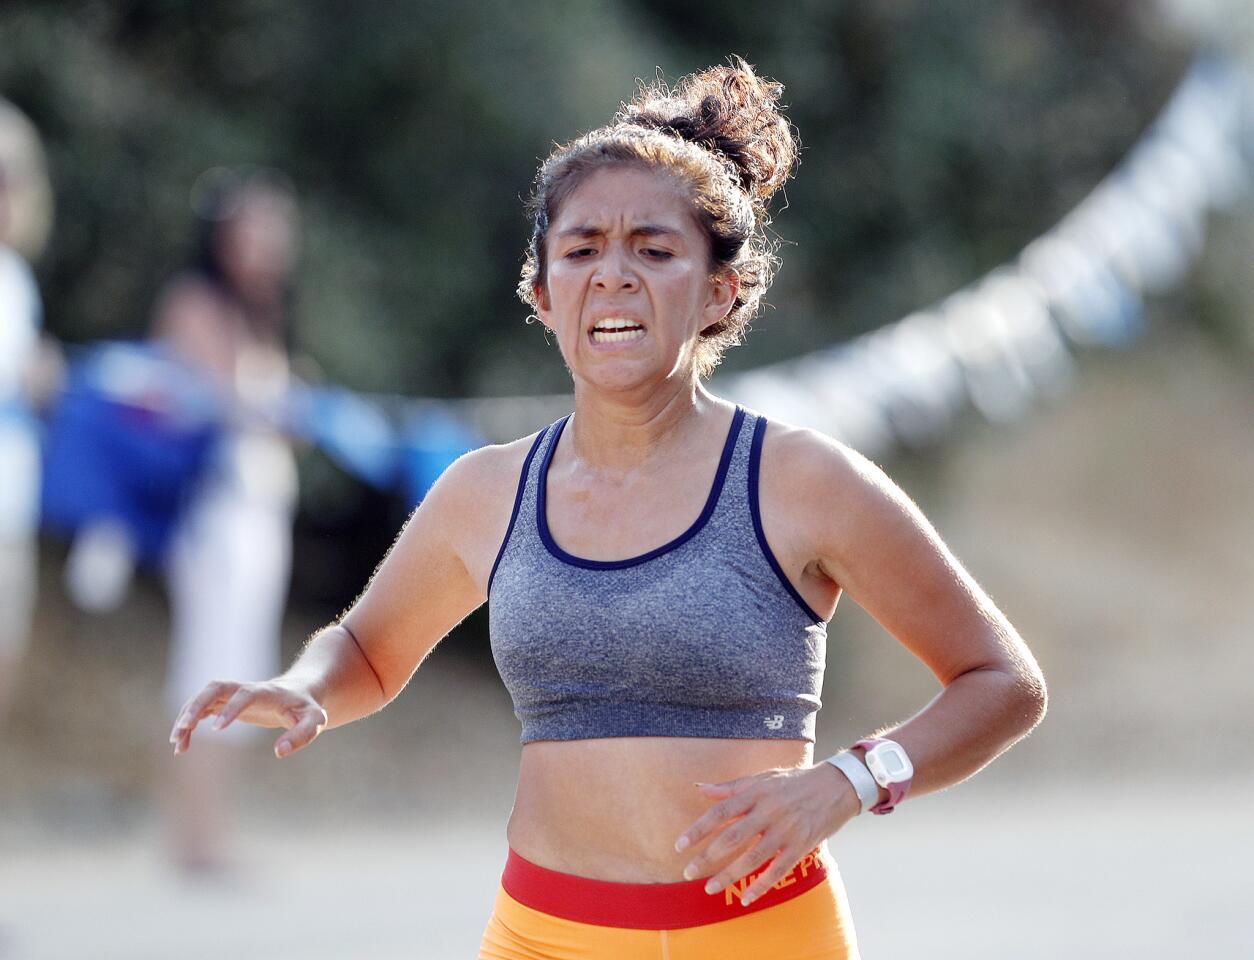 Photo Gallery: 5k All-Comers race at Griffith Park sponsored by Burbank High